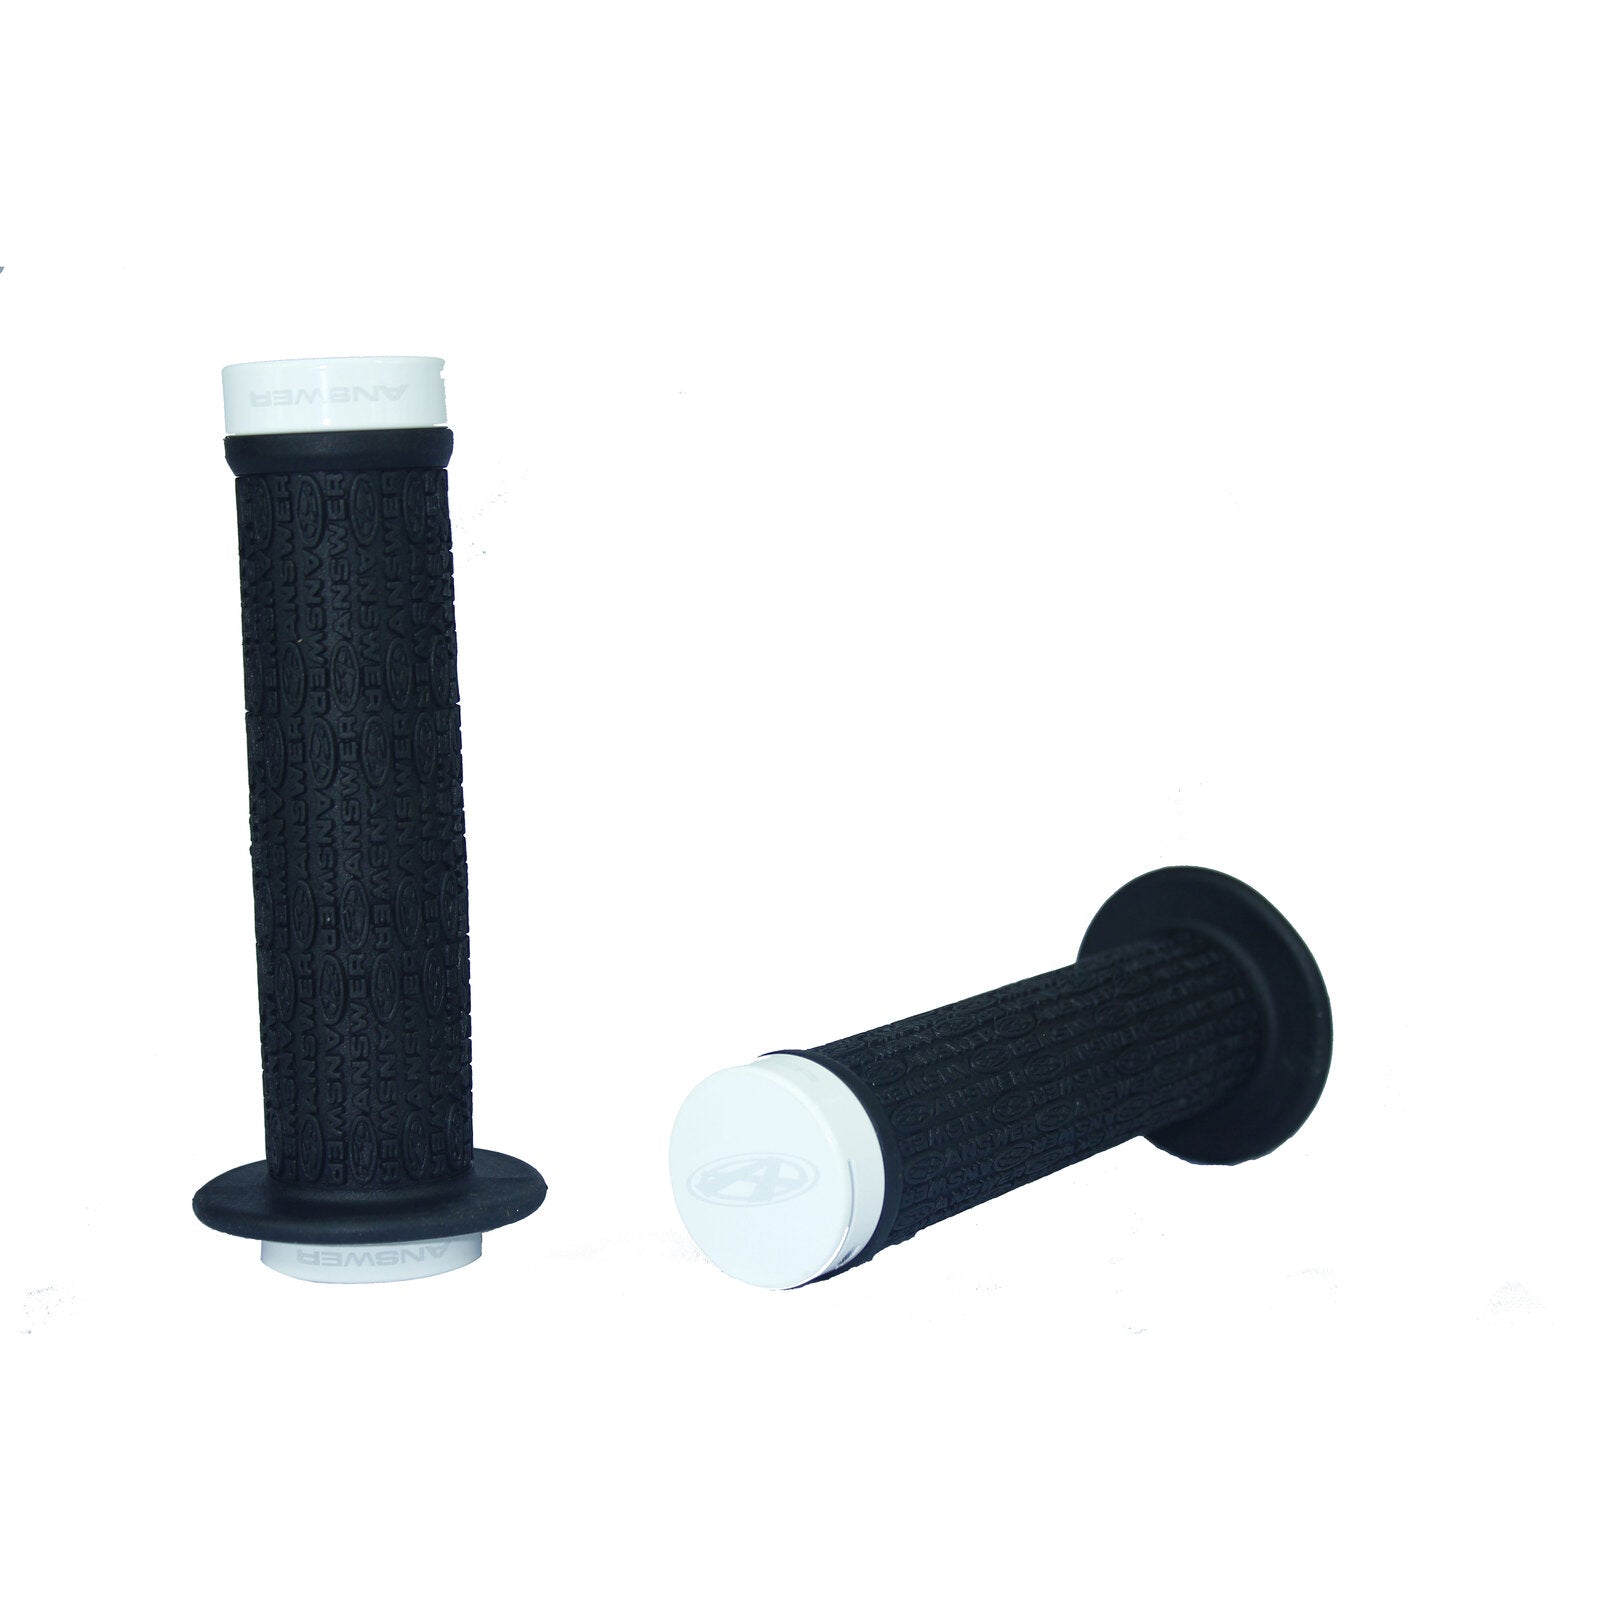 The Answer Pro Lock-On Flanged grips, featuring a pair of black rubber grips, are showcased on a simple white background.